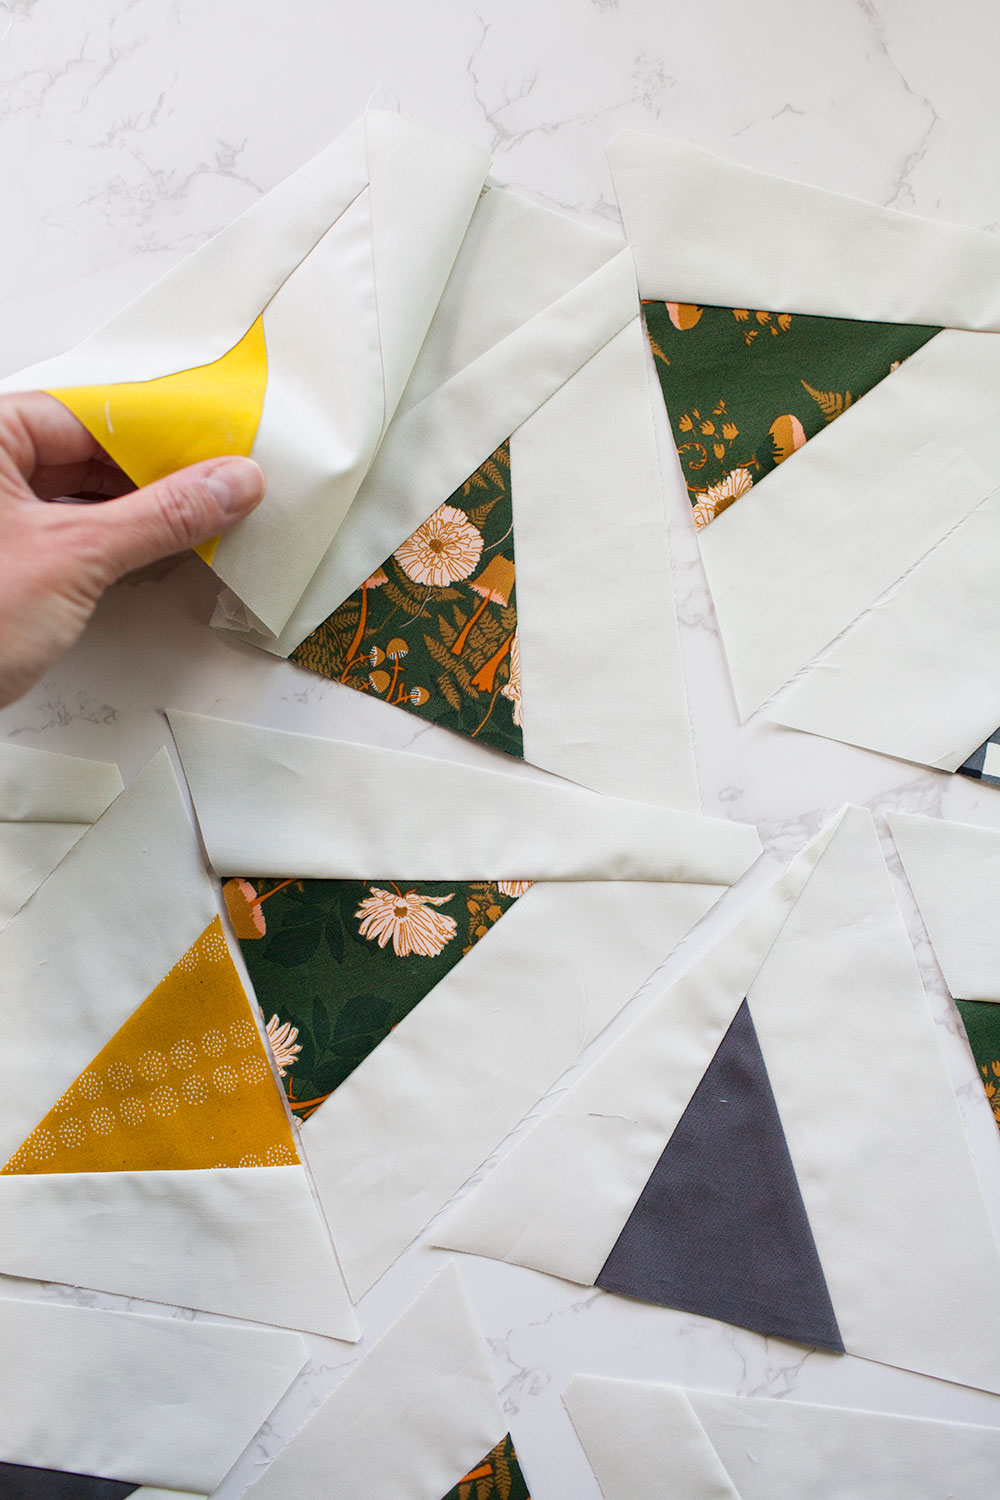 The Perennial quilt sew along will help you make this beautiful modern quilt through added instructions, pictures and tips! suzyquilts.com